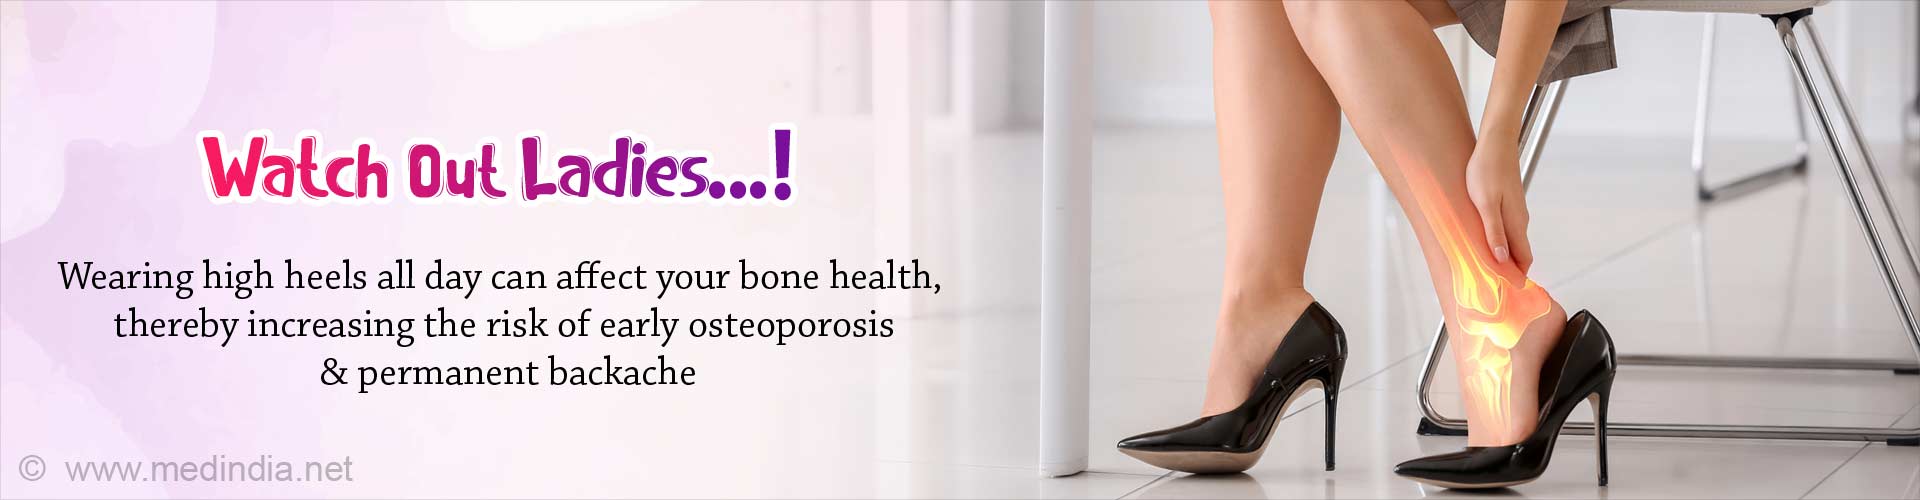 Watch Out Ladies. Wearing high heels all day can affect your bone health, thereby increasing the risk of early osteoporosis and permanent backache.